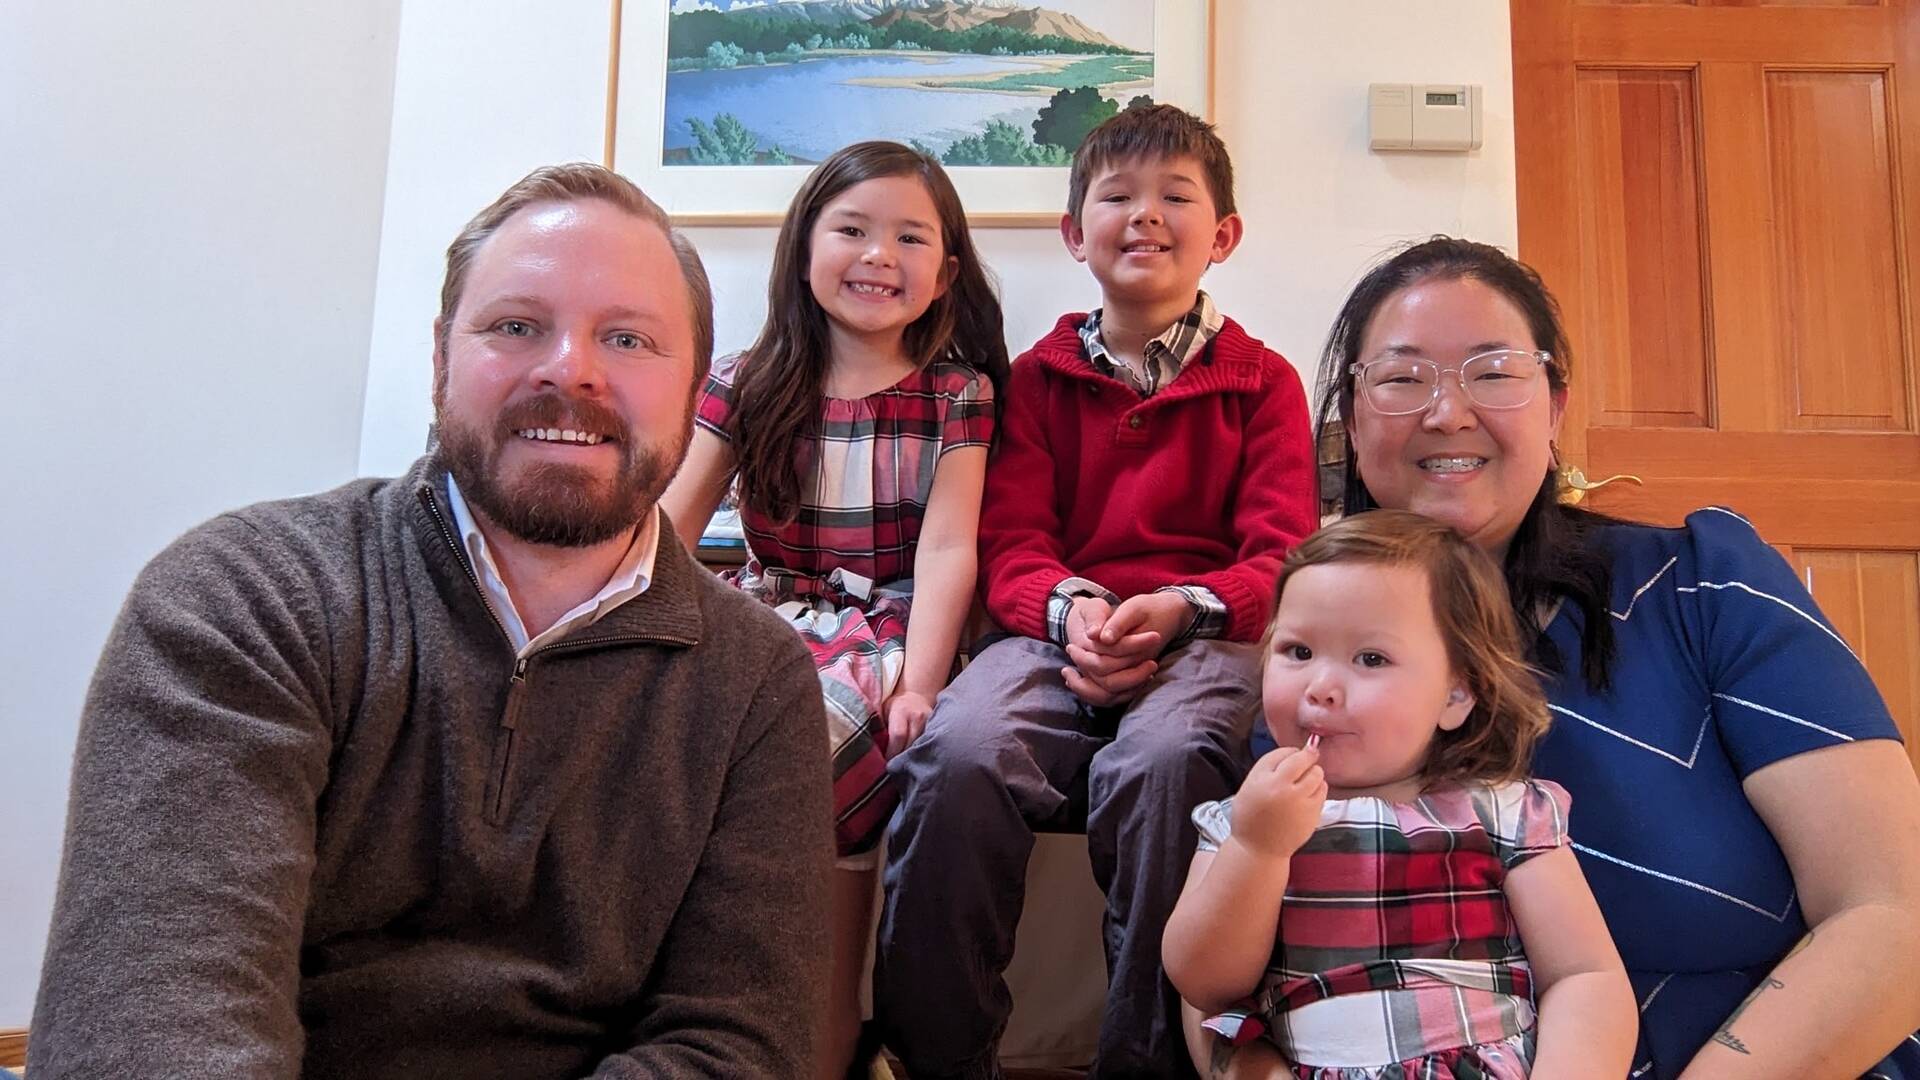 the frese family poses for a photo, the father has red hair, the mother is of asian descent and their three young kids have brown hair